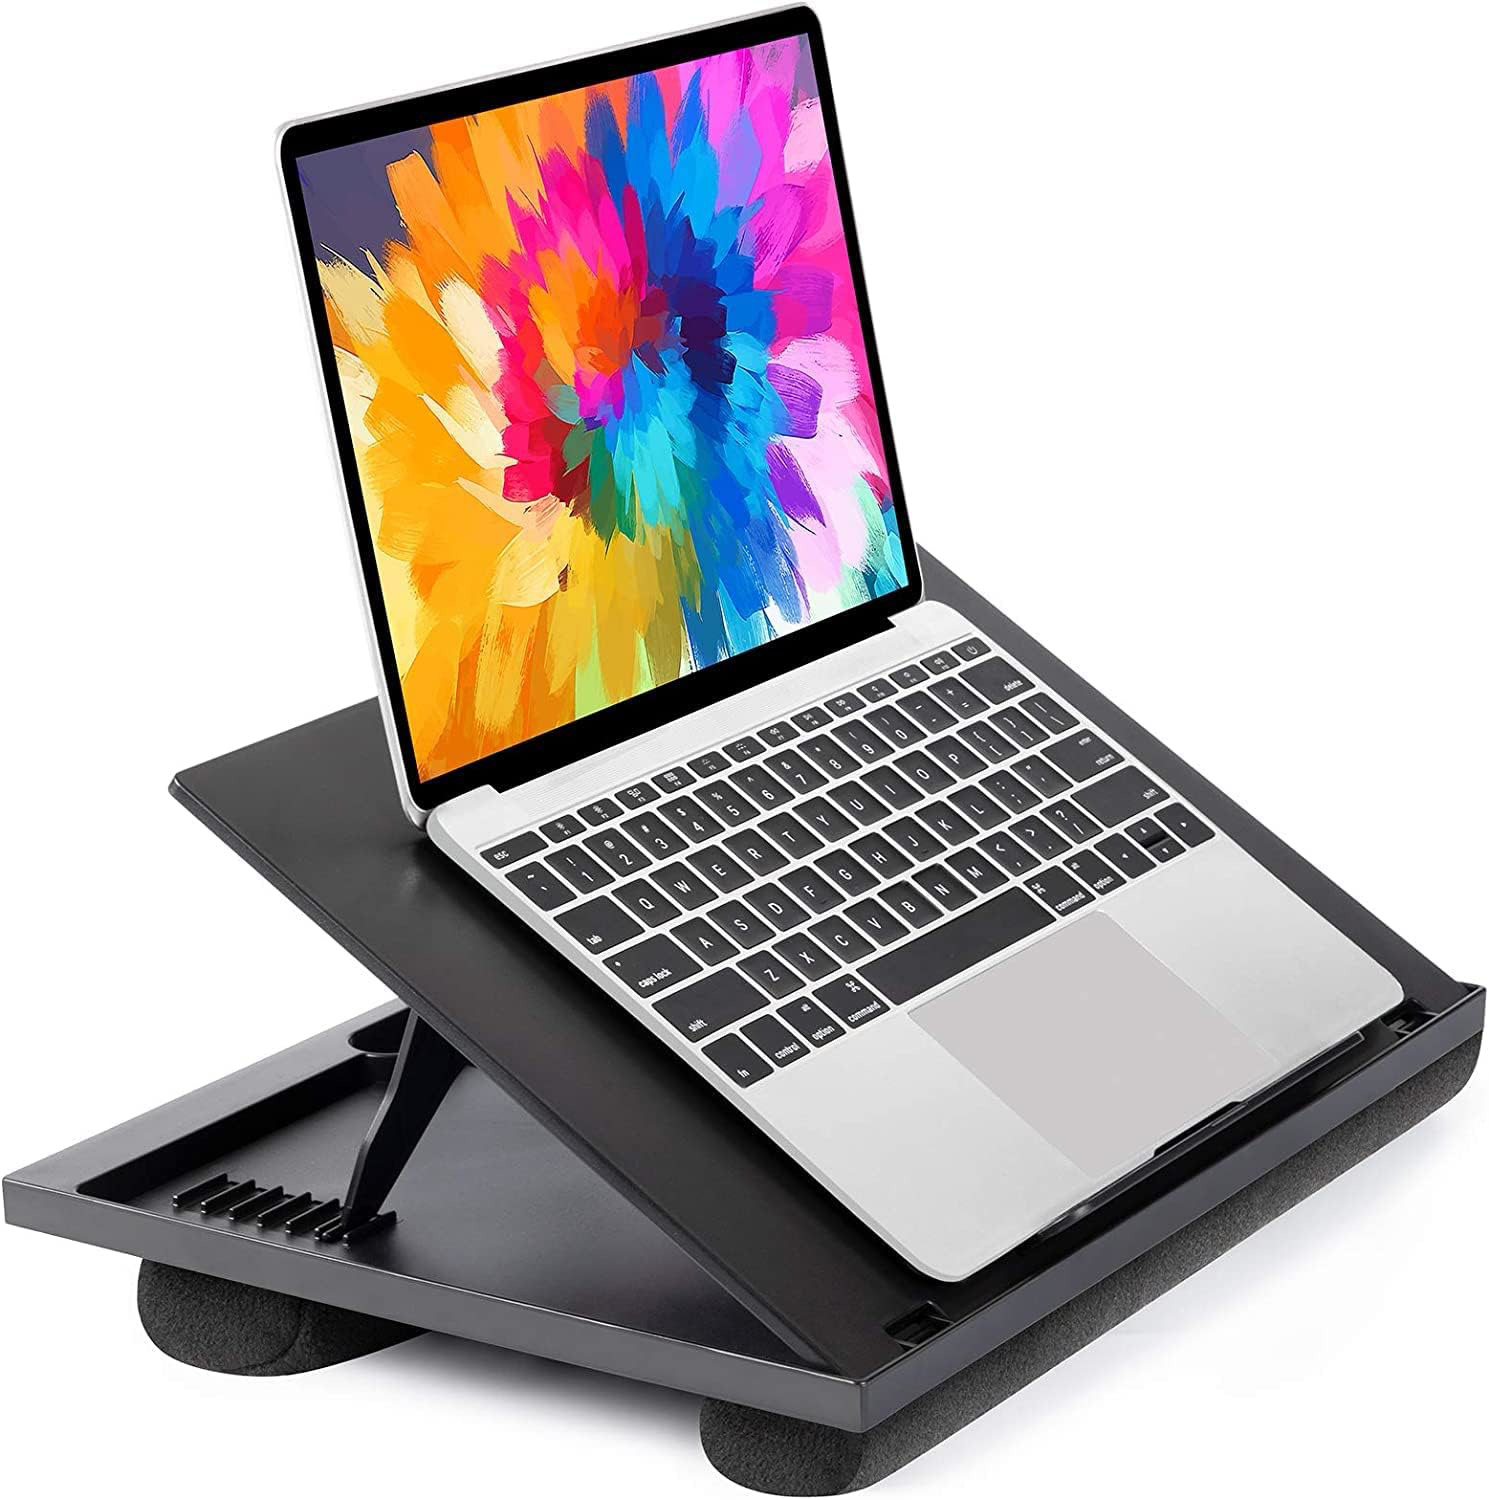 Adjustable Lap Desk - with 8 Adjustable Angles & Dual Cushions Laptop Stand for